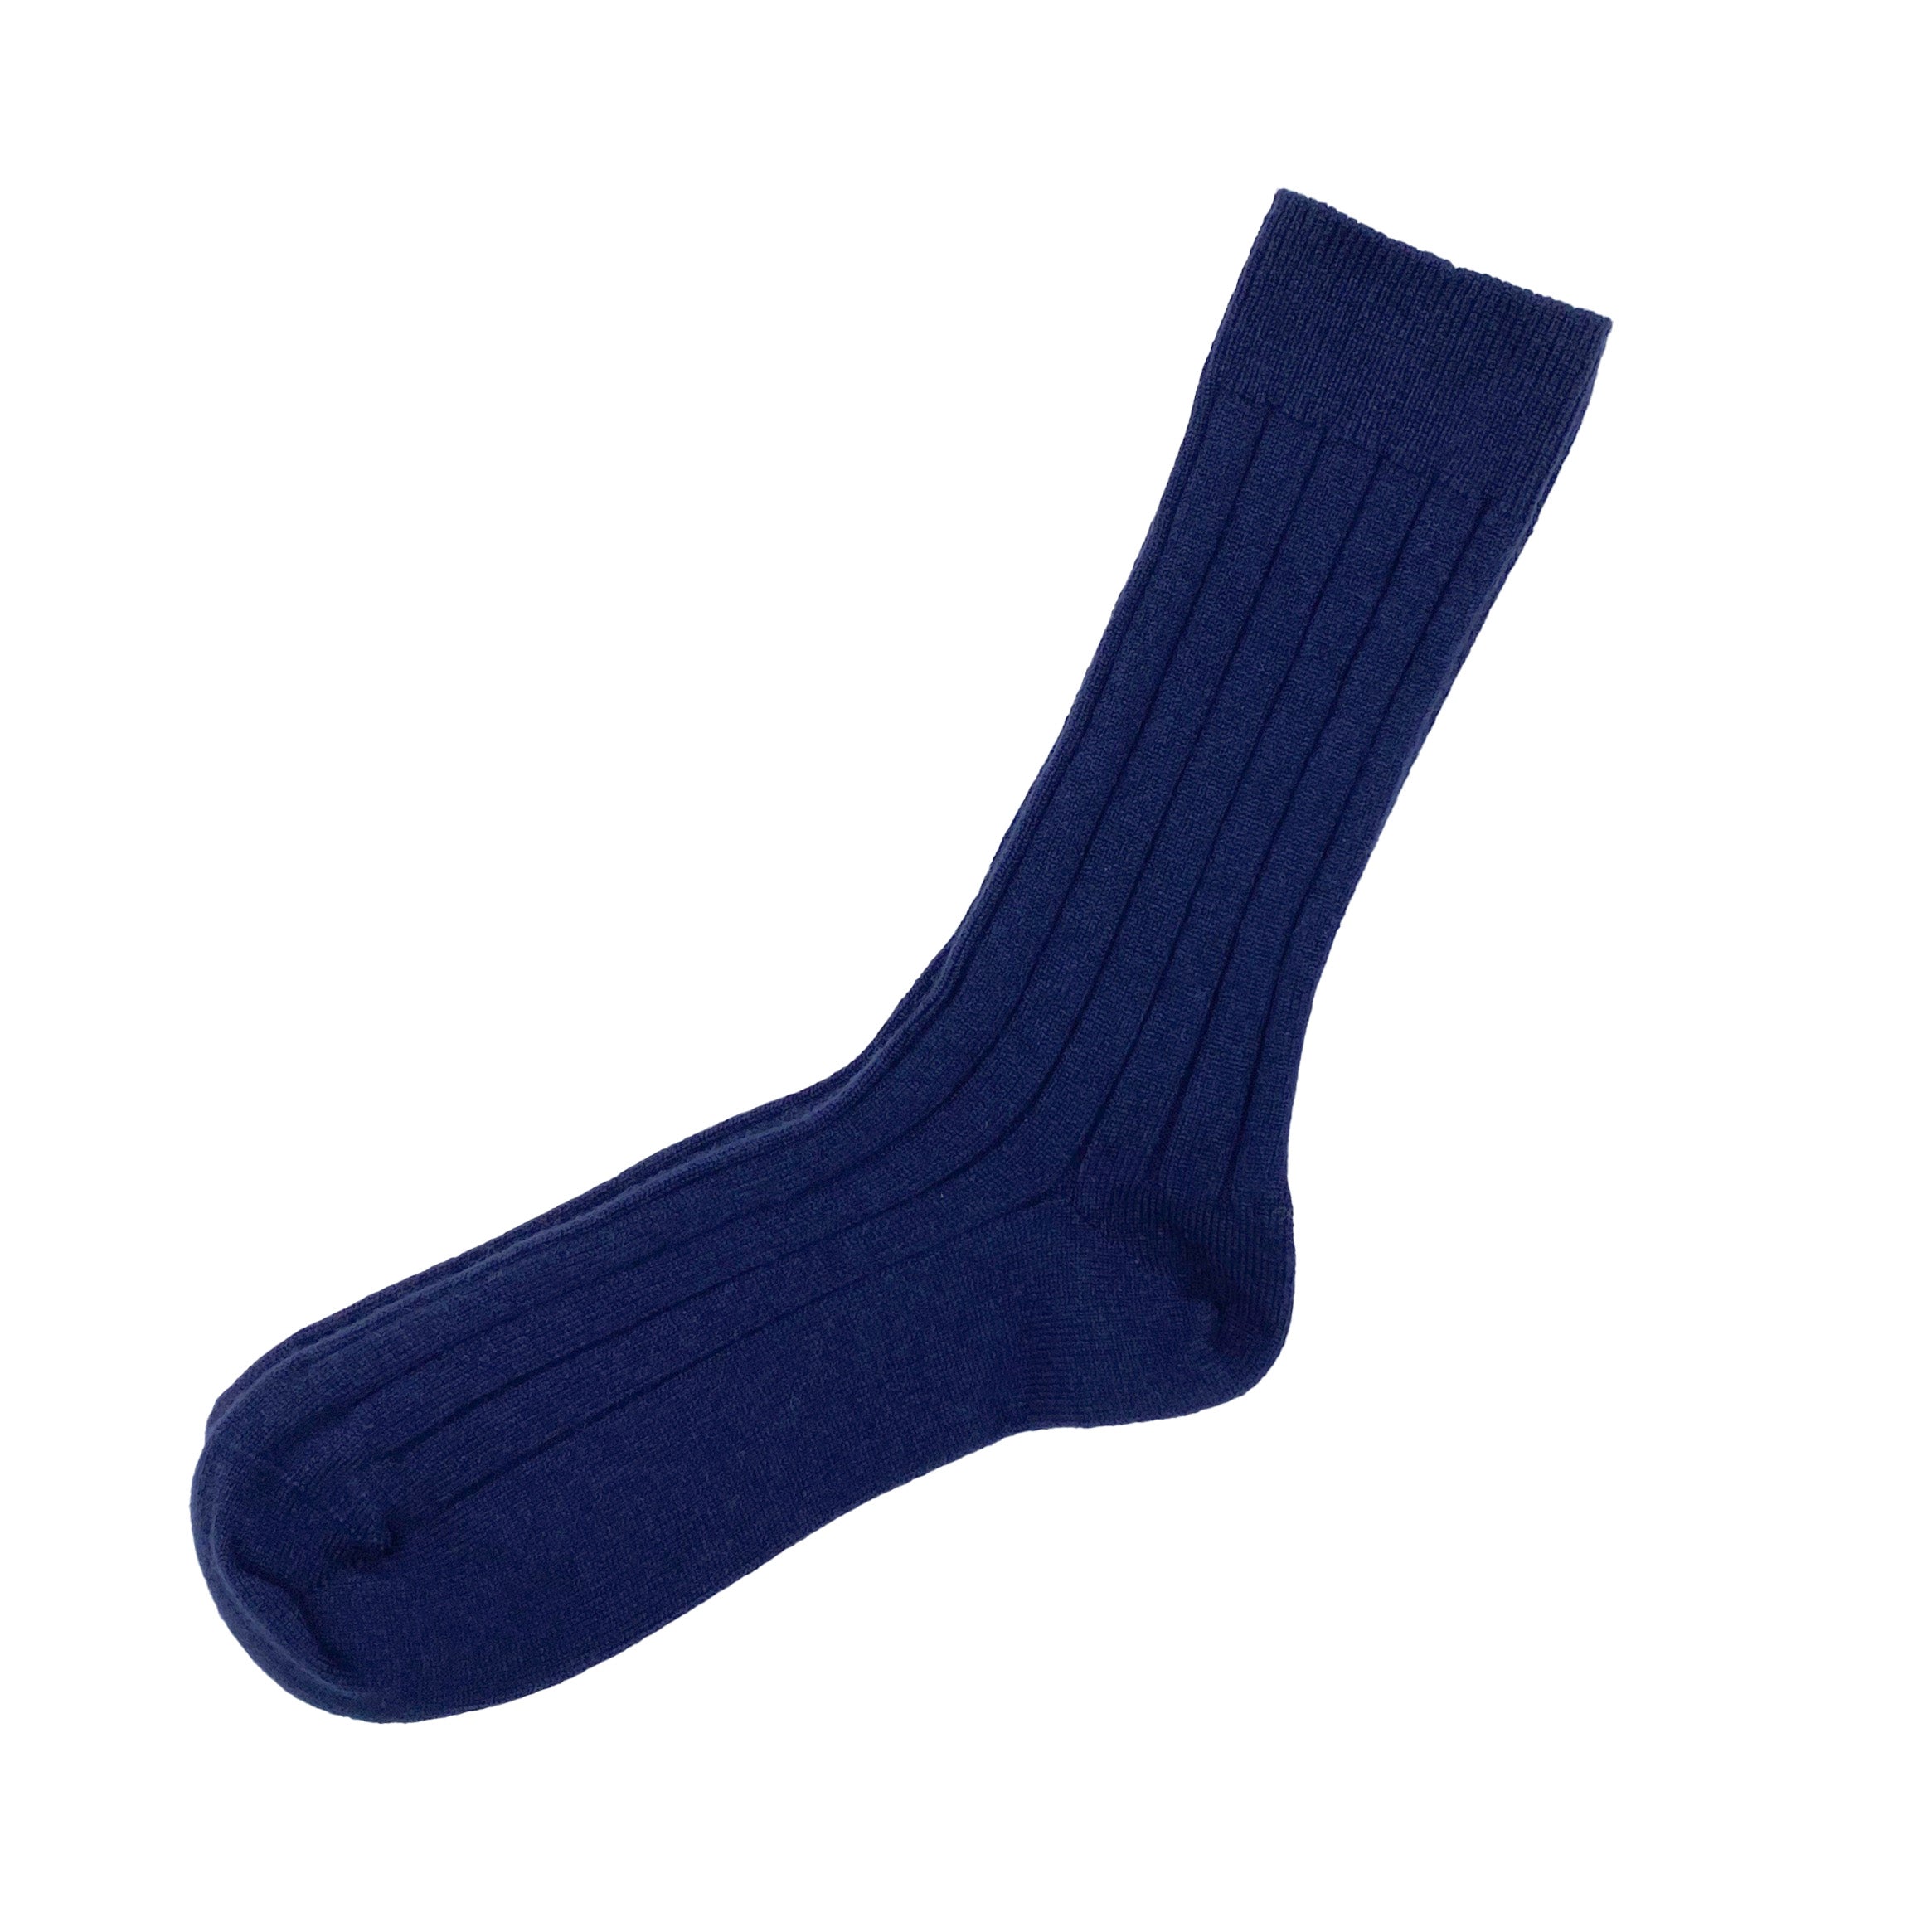 Men's Navy Luxury Ribbed Cashmere Socks Gift Boxed, made in UK by Ava Innes